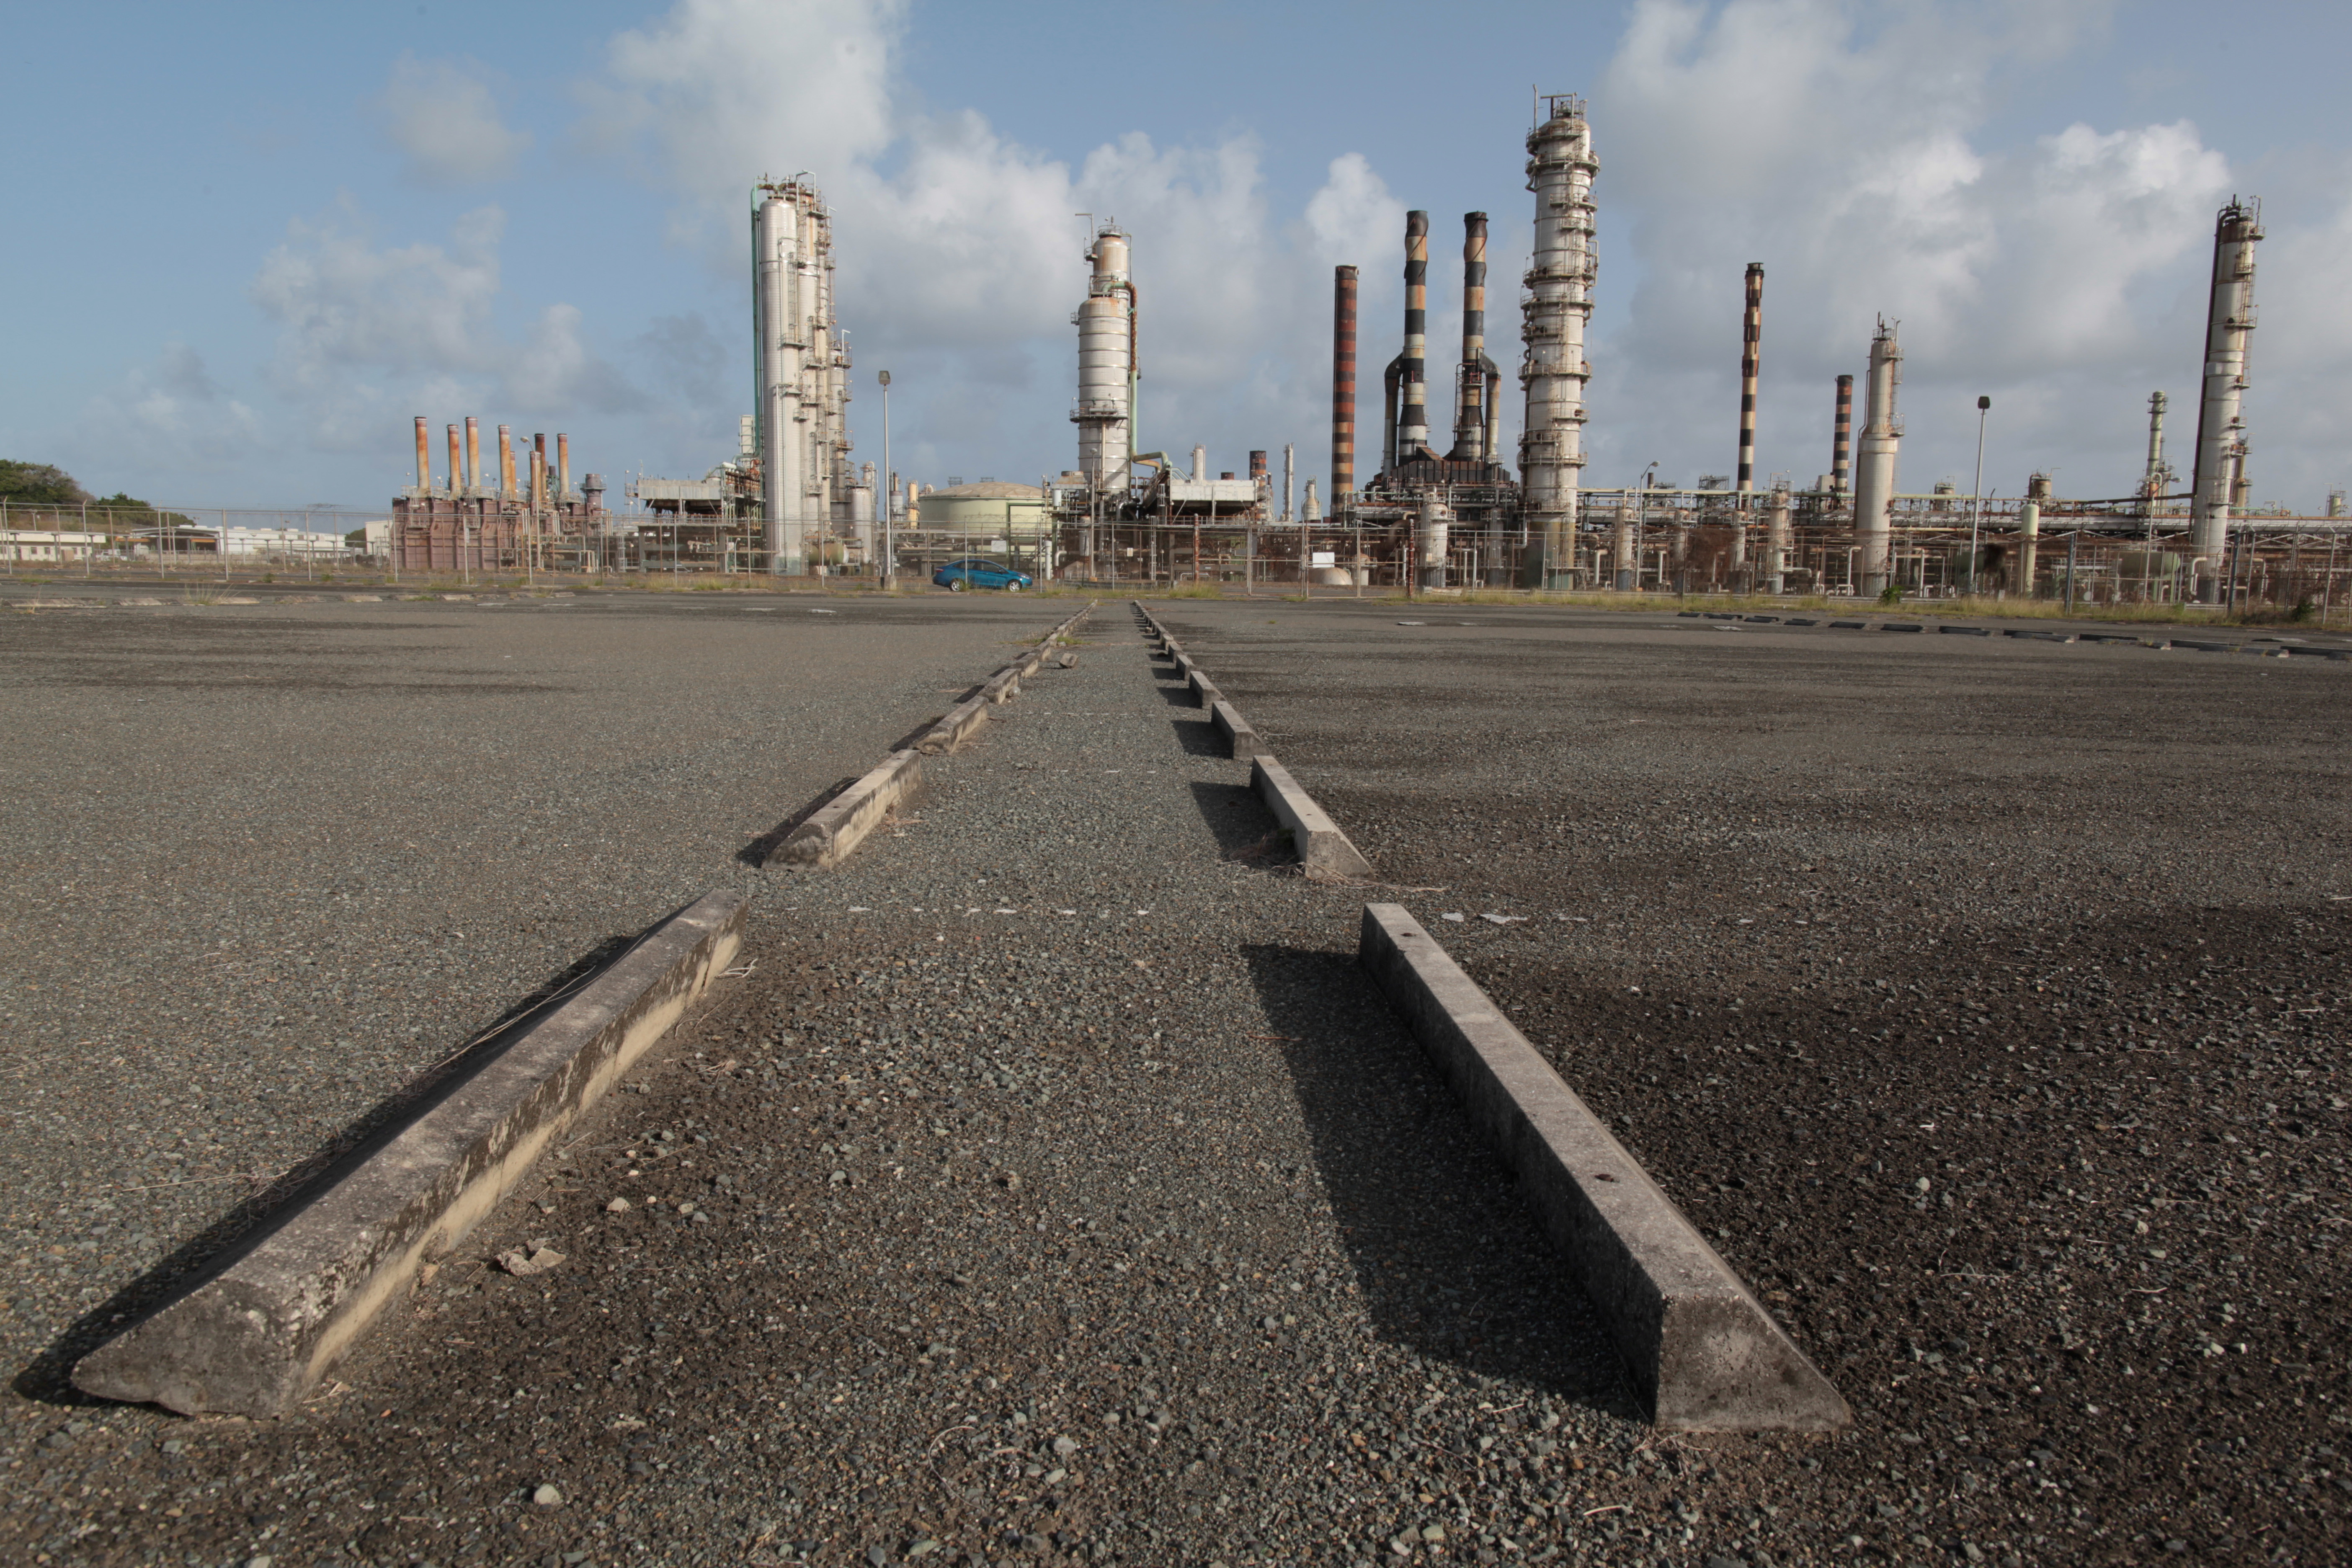 An abandoned parking lot is seen outside the installations of the Hovensa petroleum refinery in St Croix